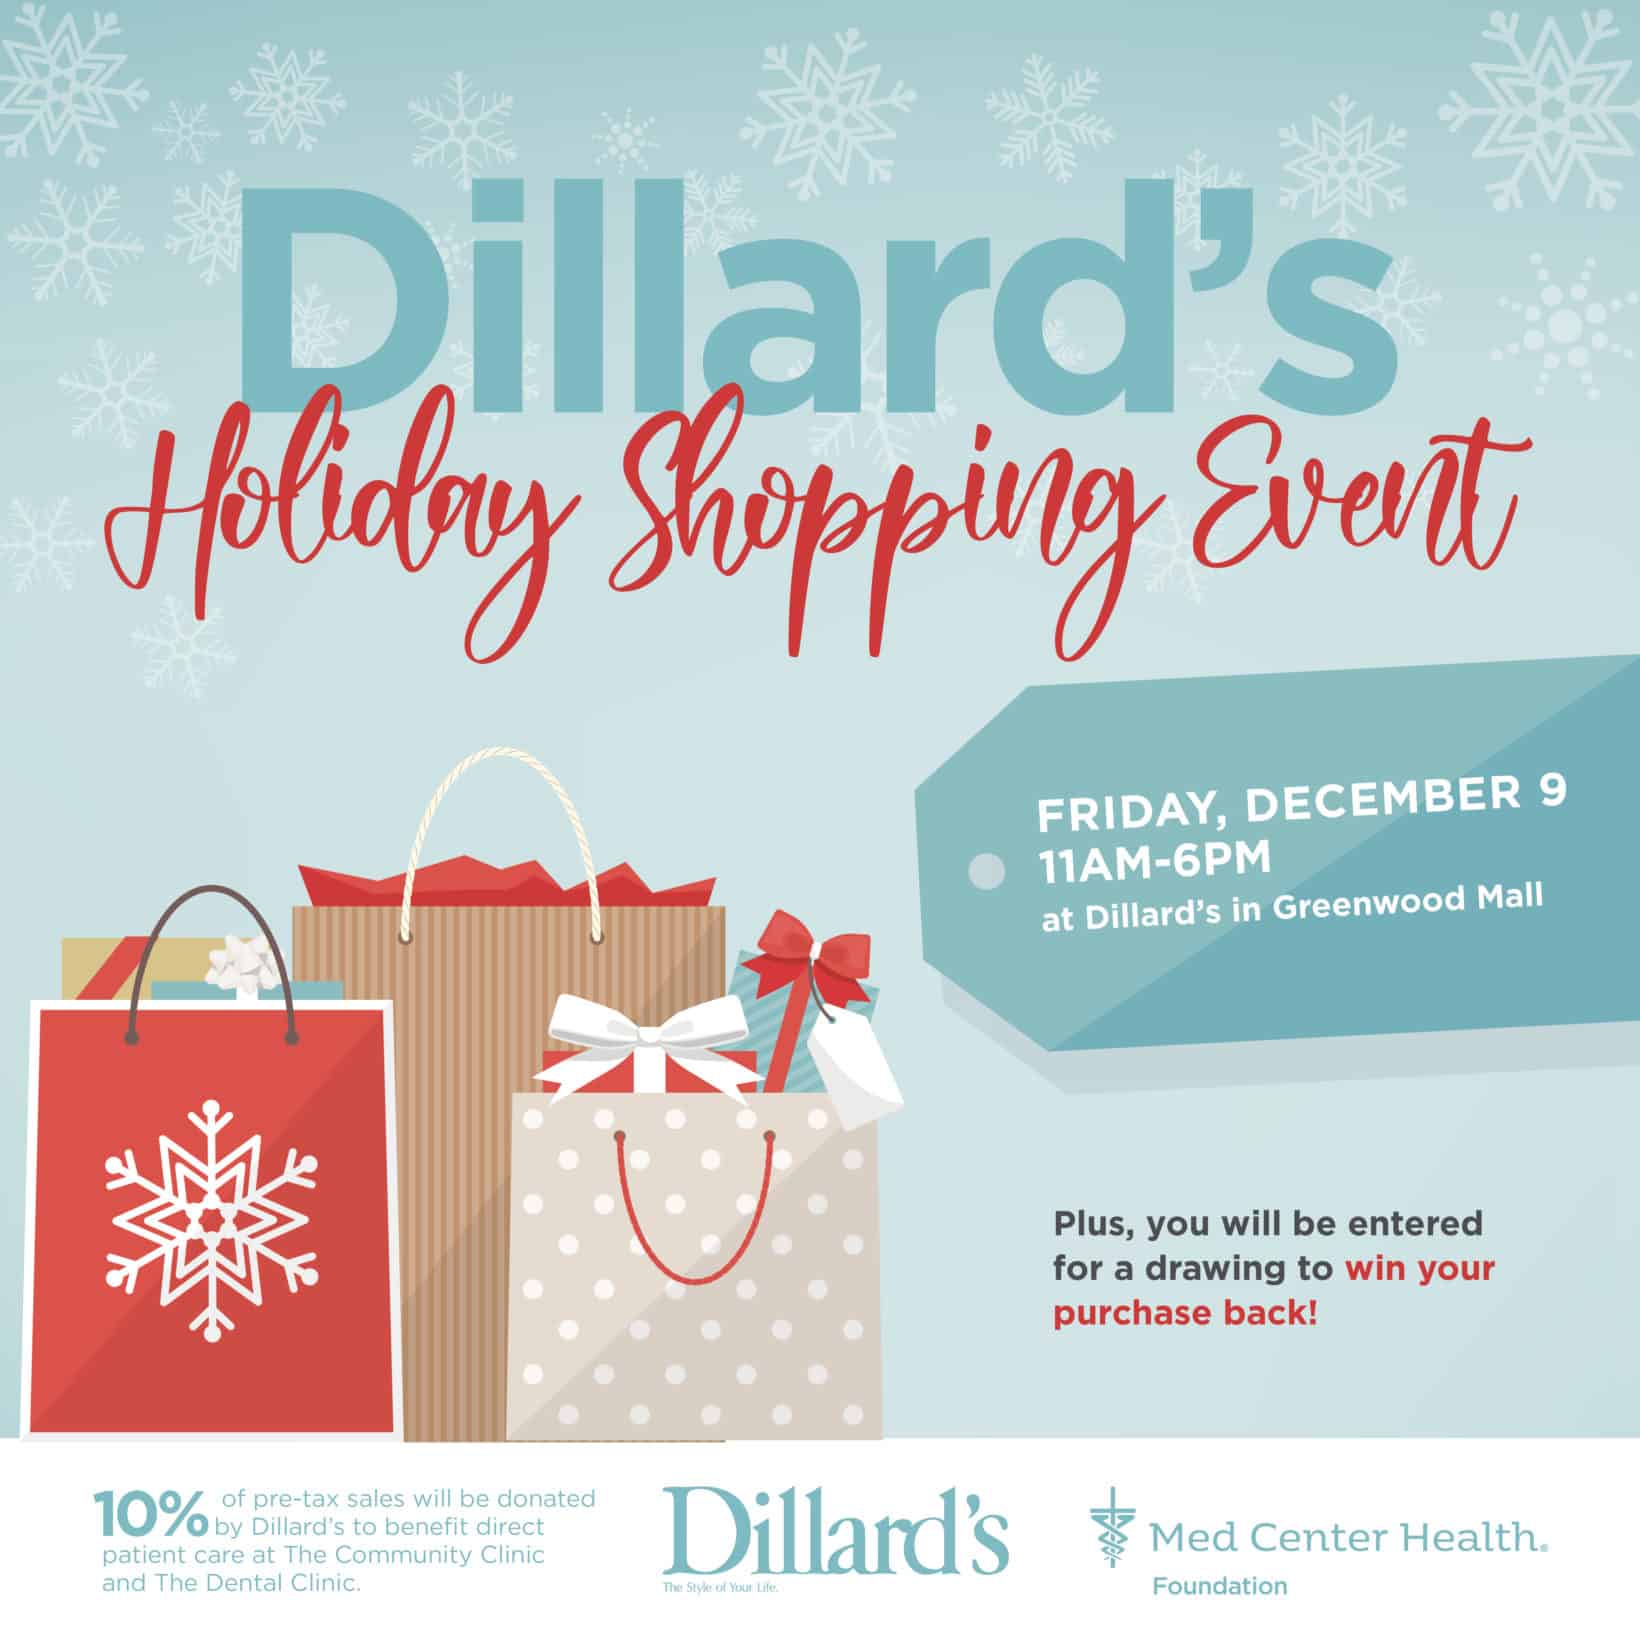 Dillard’s Holiday Gift Card & Shopping Event is Friday! Med Center Health